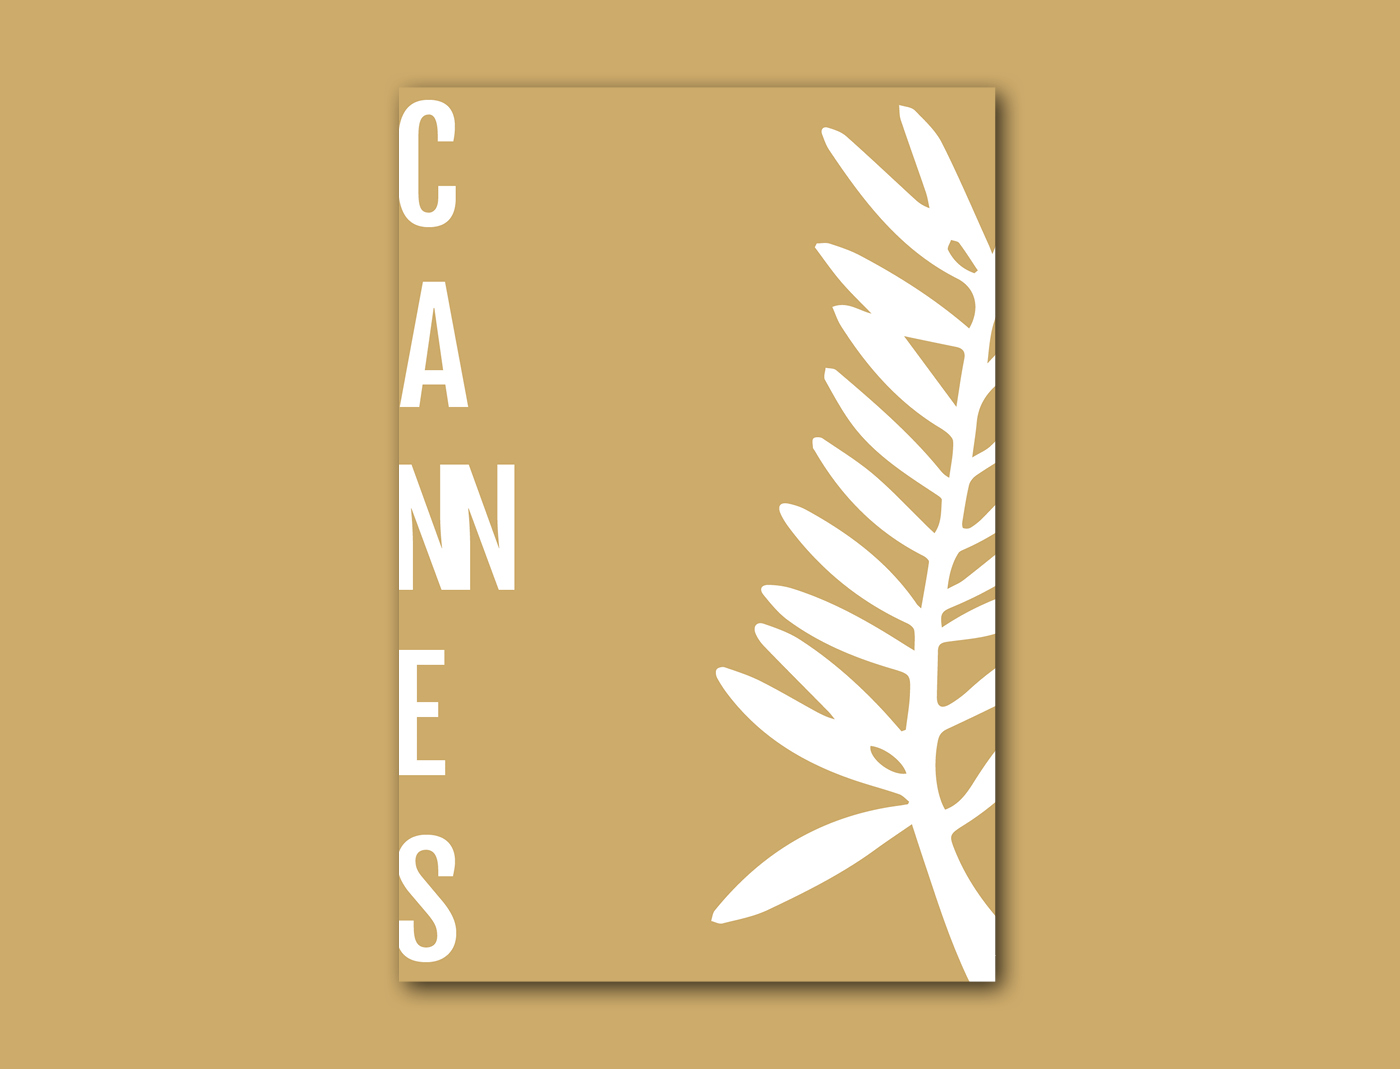 Be-Cannes_Data3